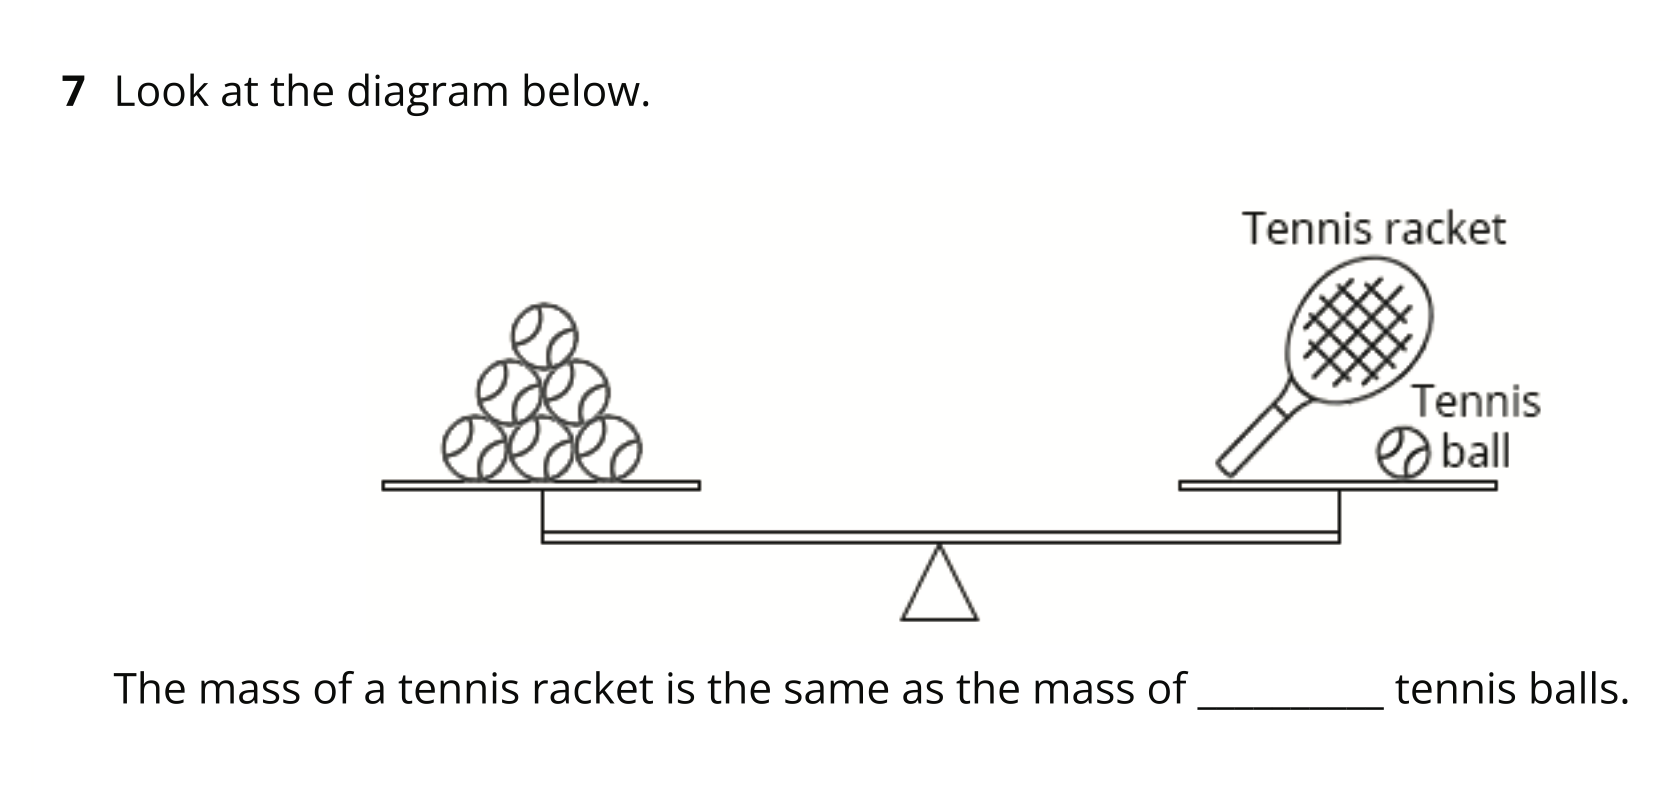 Primary 2 Maths Worksheets